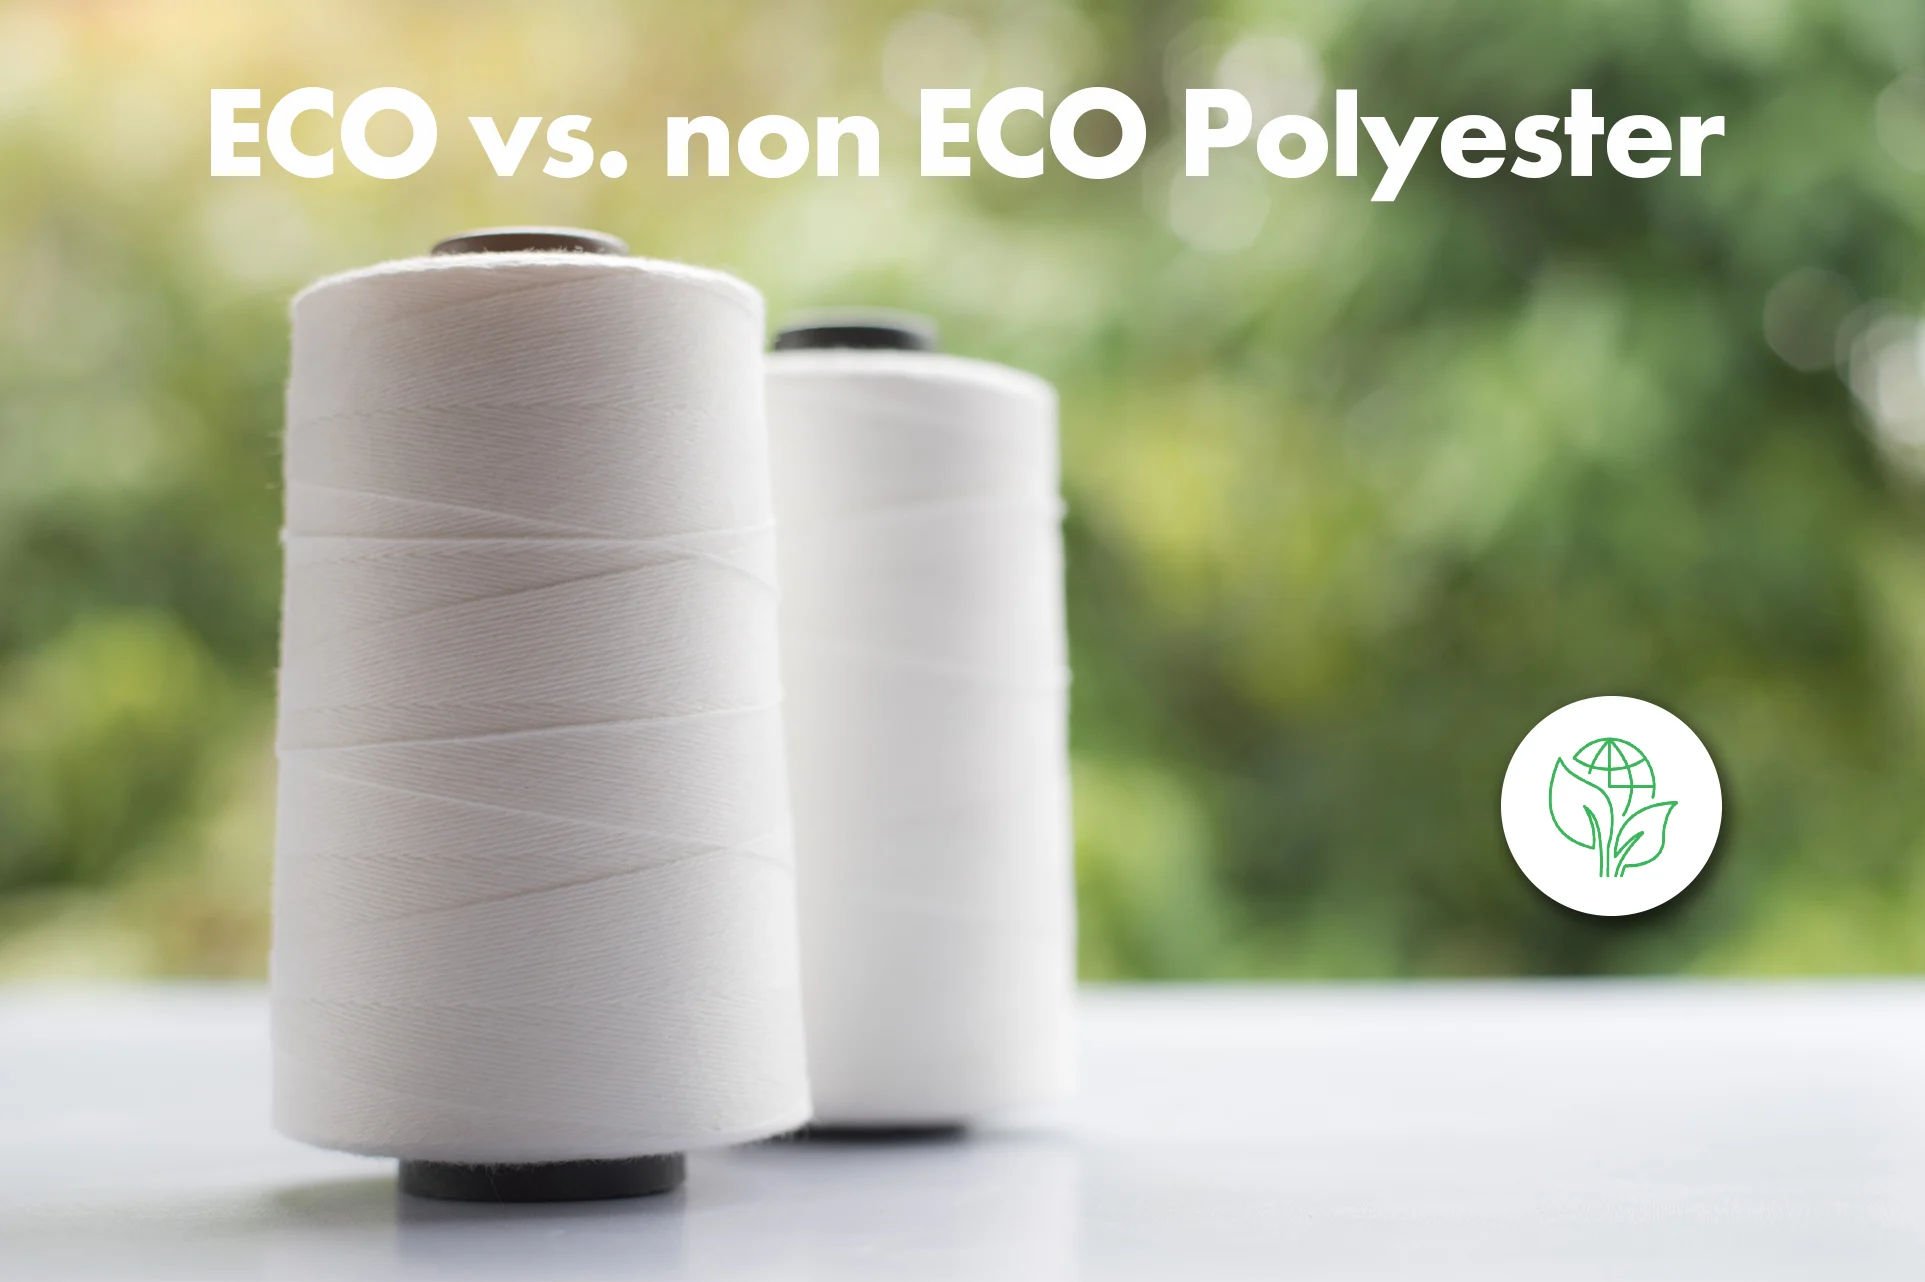 The difference between conventional polyester and rPET polyester